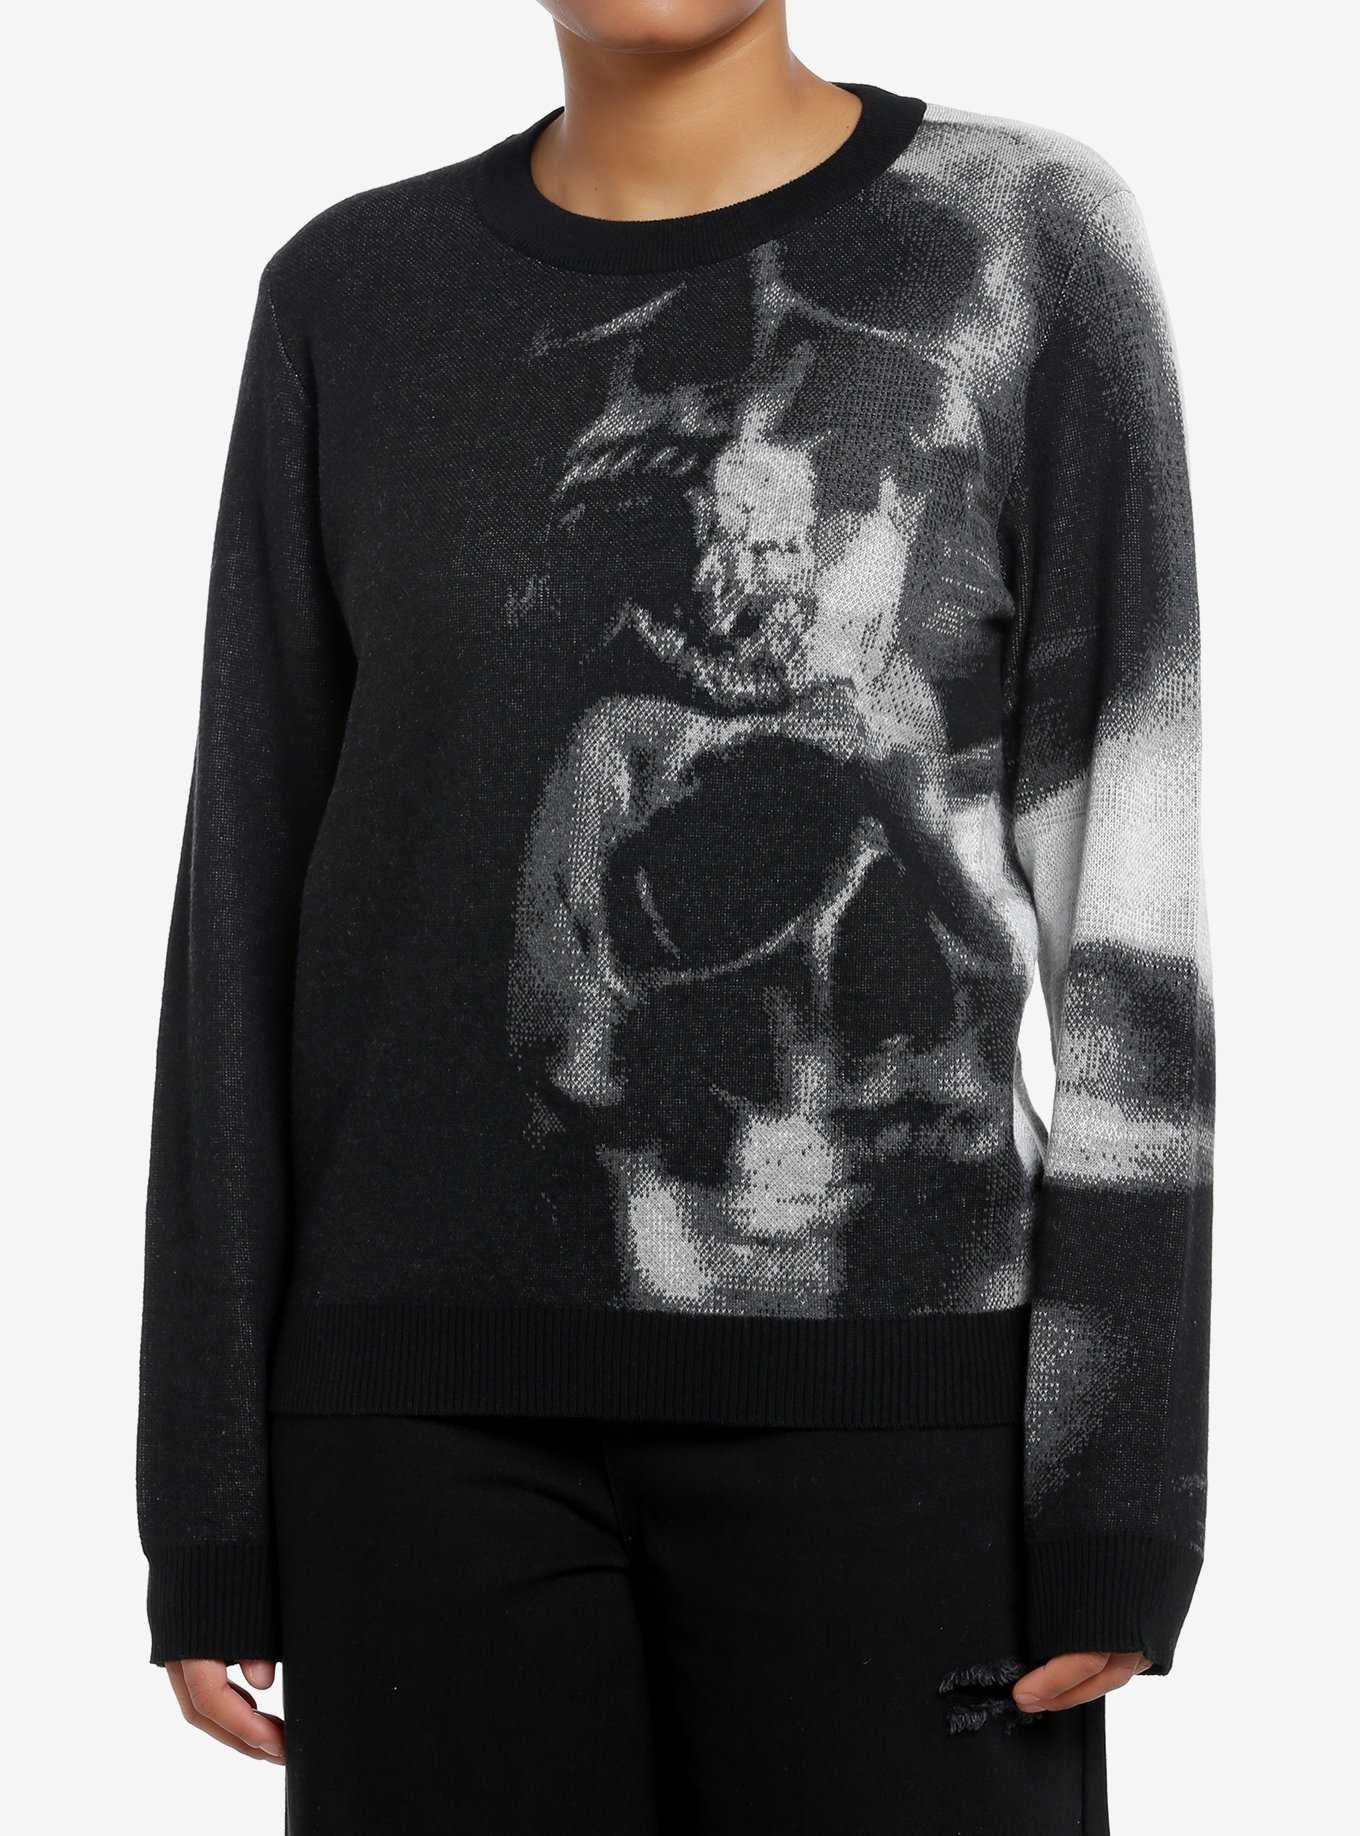 Social Collision Blurry Skull Girls Knit Sweater, , hi-res